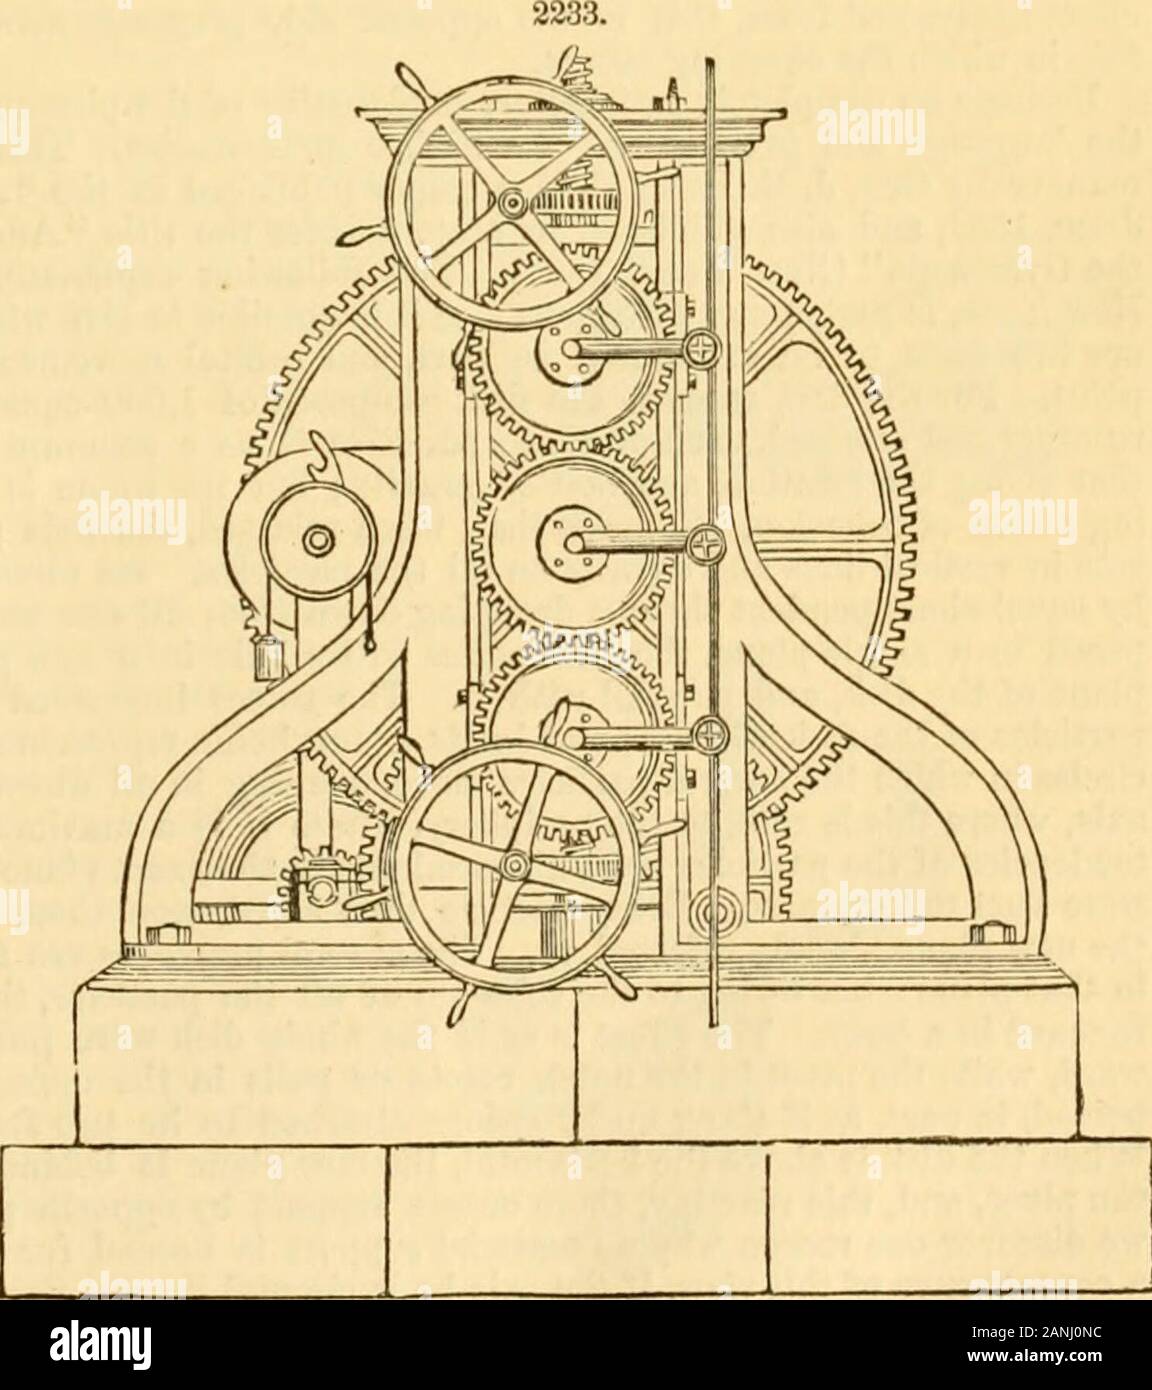 Appletons' cyclopaedia of applied mechanics: a dictionary of mechanical engineering and the mechanical arts . achamber into which the gum alsoenters, and at the same time arerotated, so that they emerge cov-ered with a layer of gutta-percha,which is increased in thickness asdesired by repetitions of the pro-cess. Vulcanization of gutta-perchais effected in the same manner asthat of India-rubber. The opera-tion renders the material muchharder, but it is not nearly sonecessary to adapt it to variouspurposes as in the case of caout-chouc ; hence it is not often done.The impossibility of working o Stock Photo